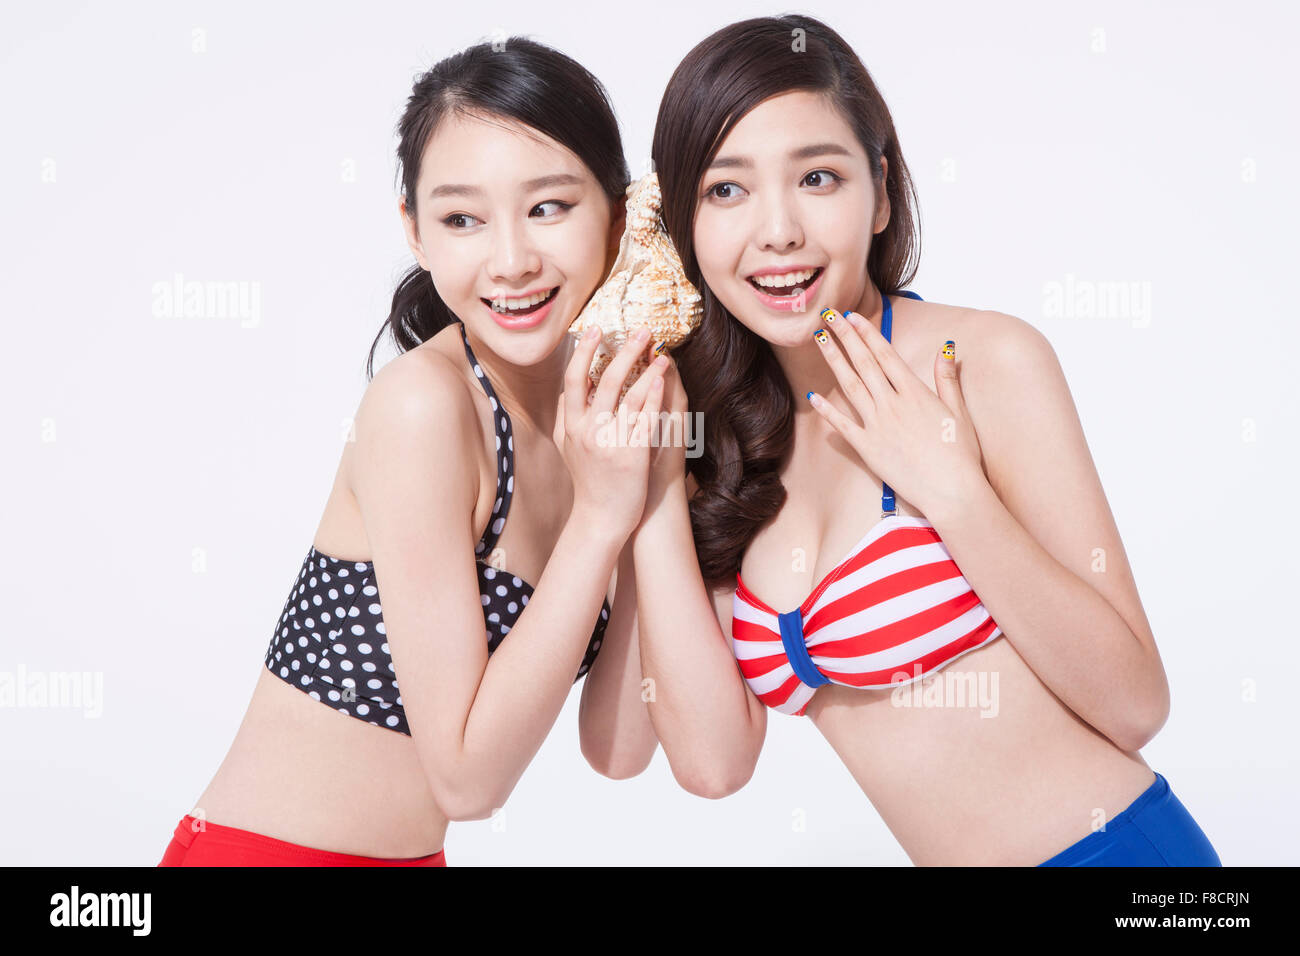 Two Funny Girls Try on Bras in Showroom Stock Photo - Image of laughter,  admire: 115056094